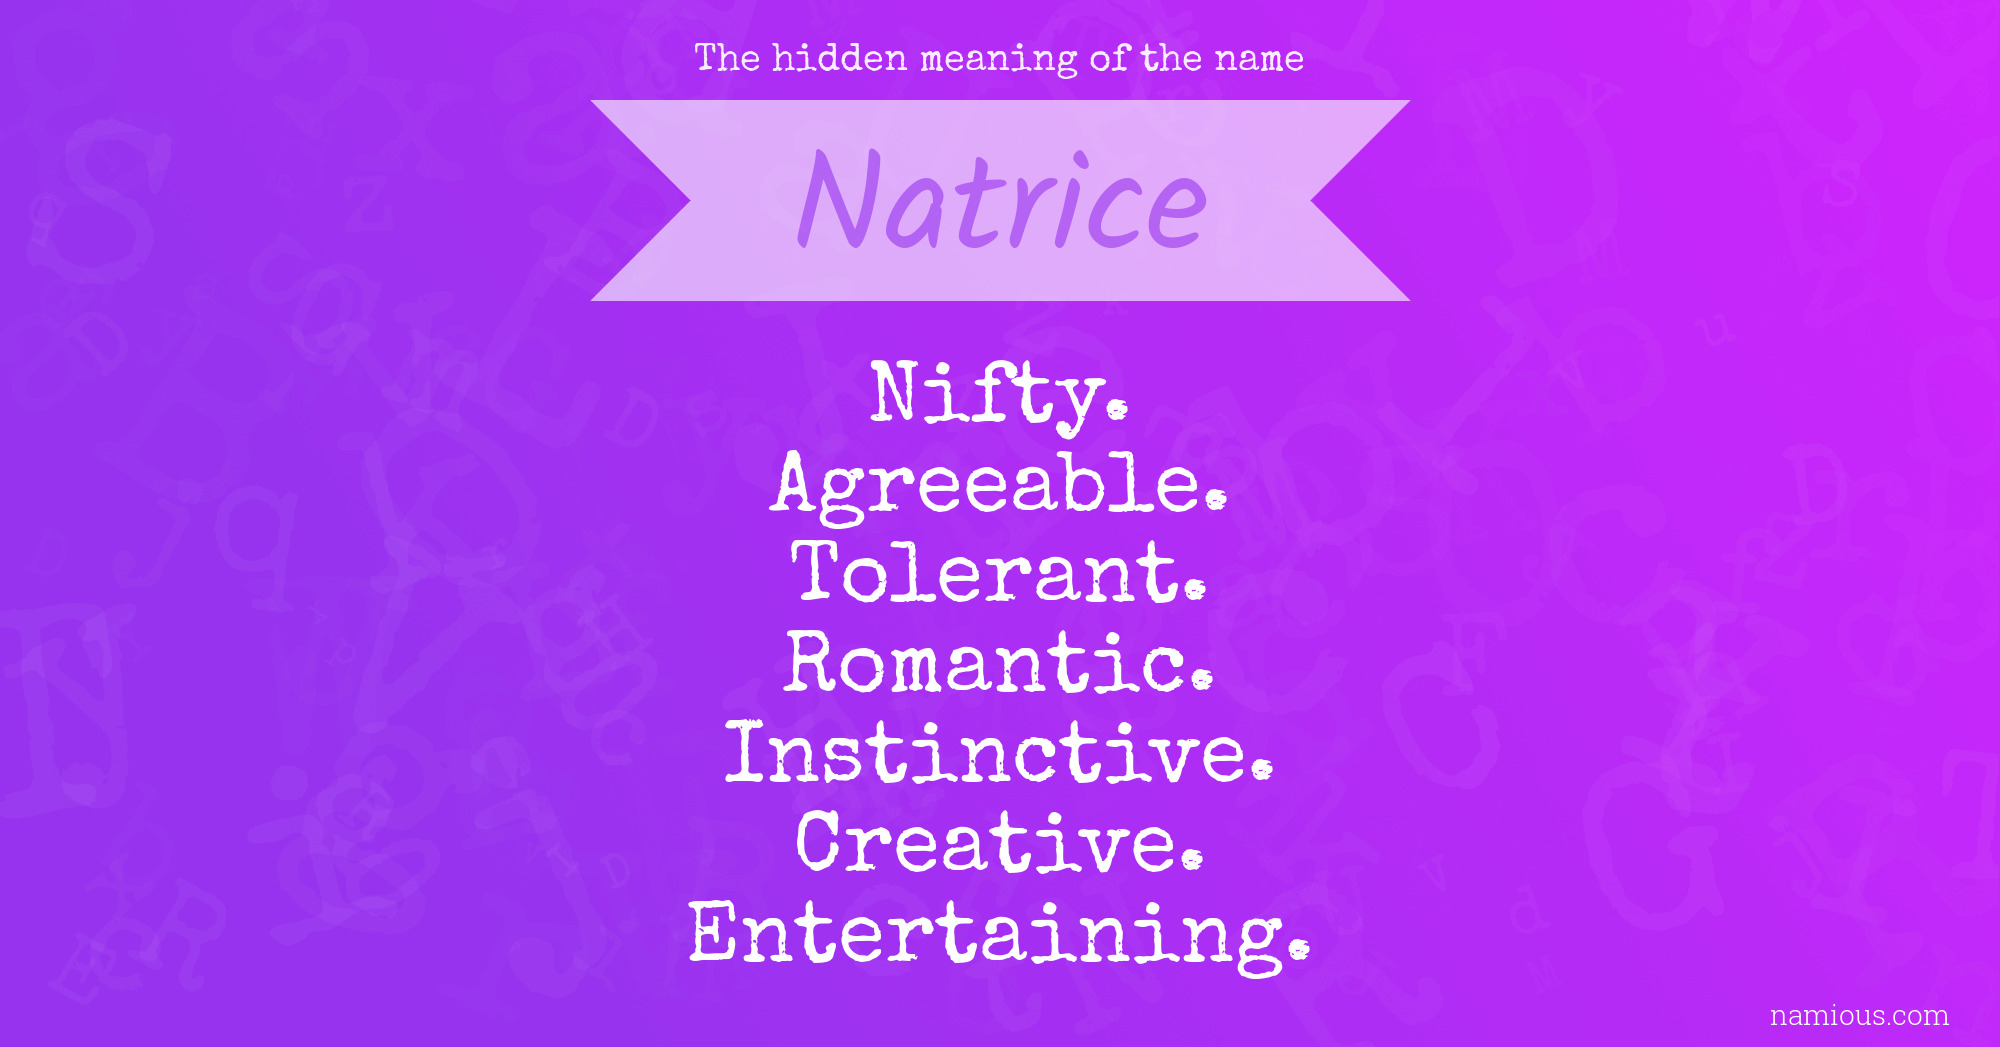 The hidden meaning of the name Natrice